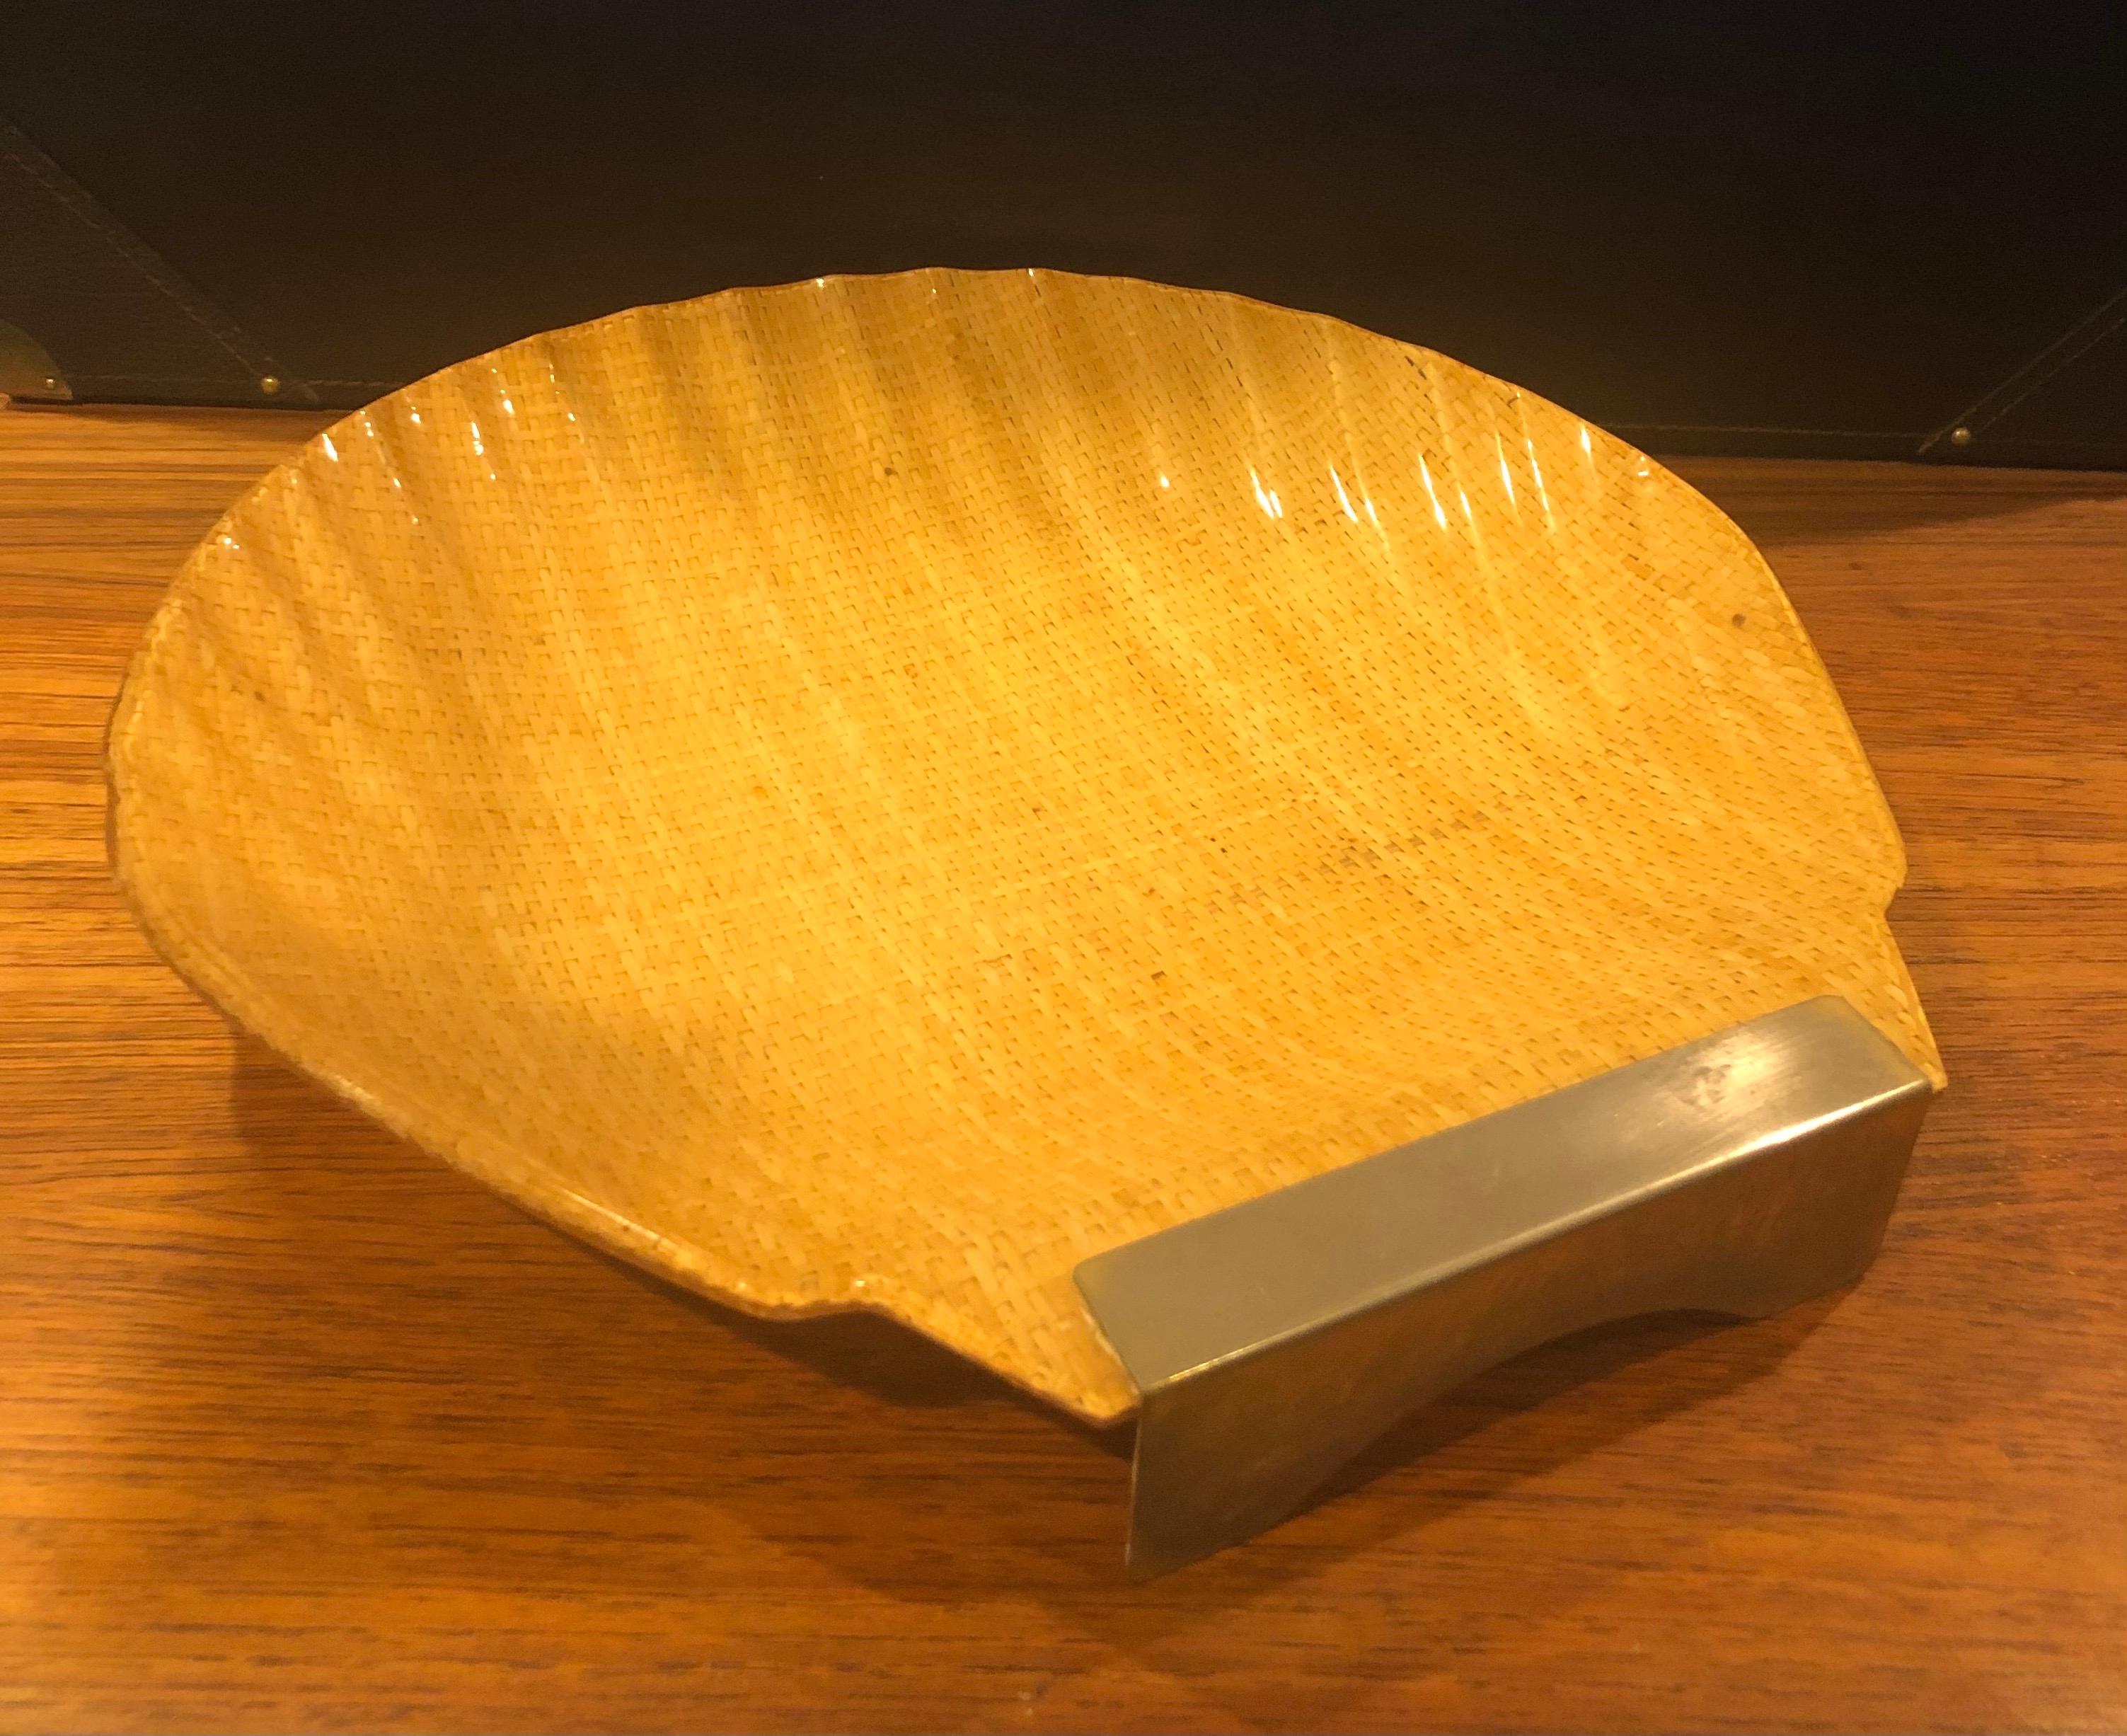 Midcentury Italian shell shaped lacquered rattan and brass platter, circa 1950s. The piece measures 15.75